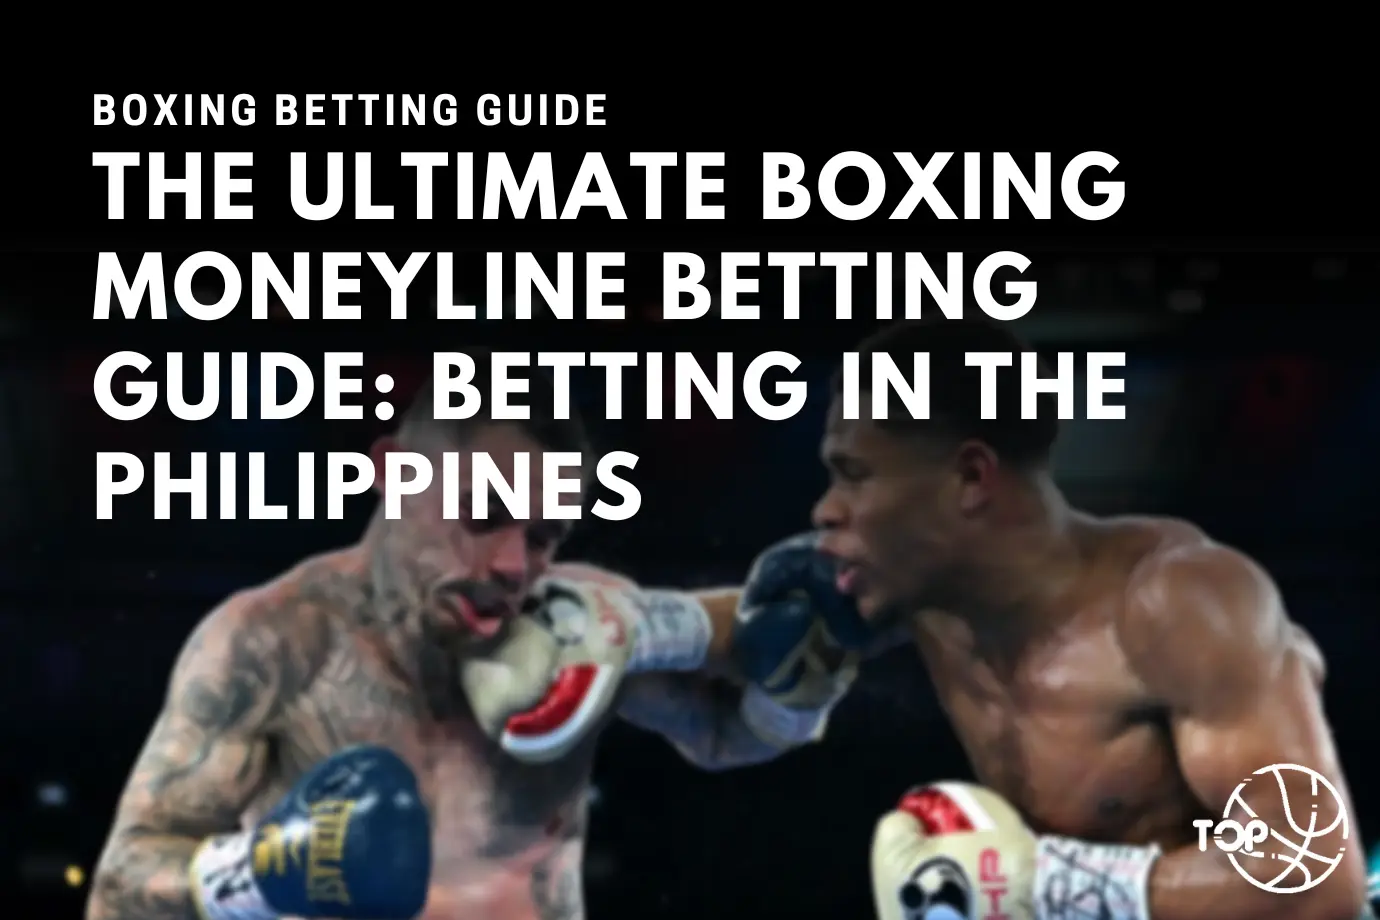 The Ultimate Boxing Moneyline Betting Guide: Betting in the Philippines